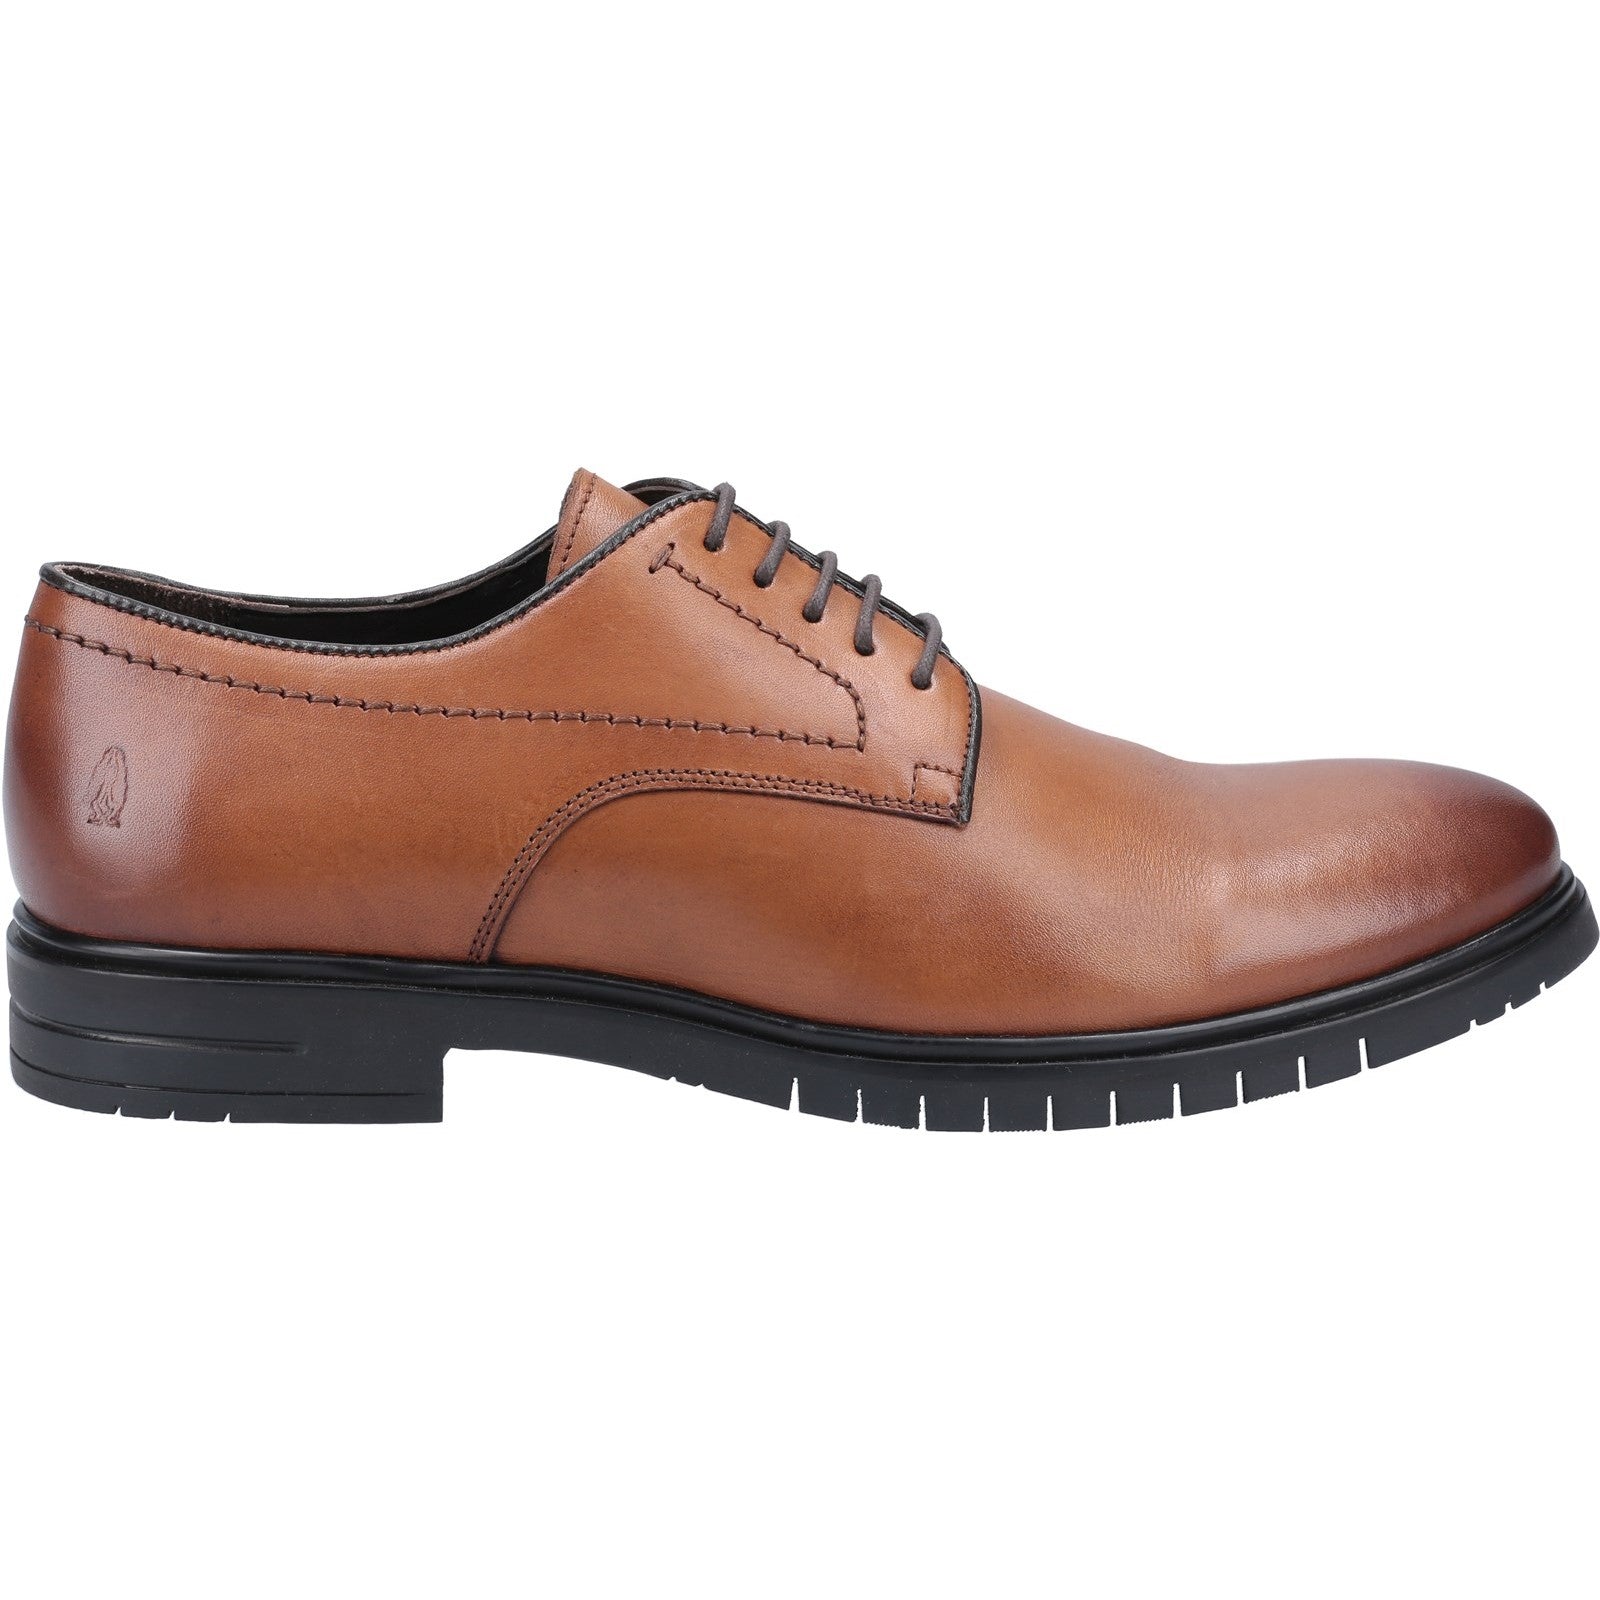 Hush Puppies Mens Sterling Leather Shoes - Tan Brown